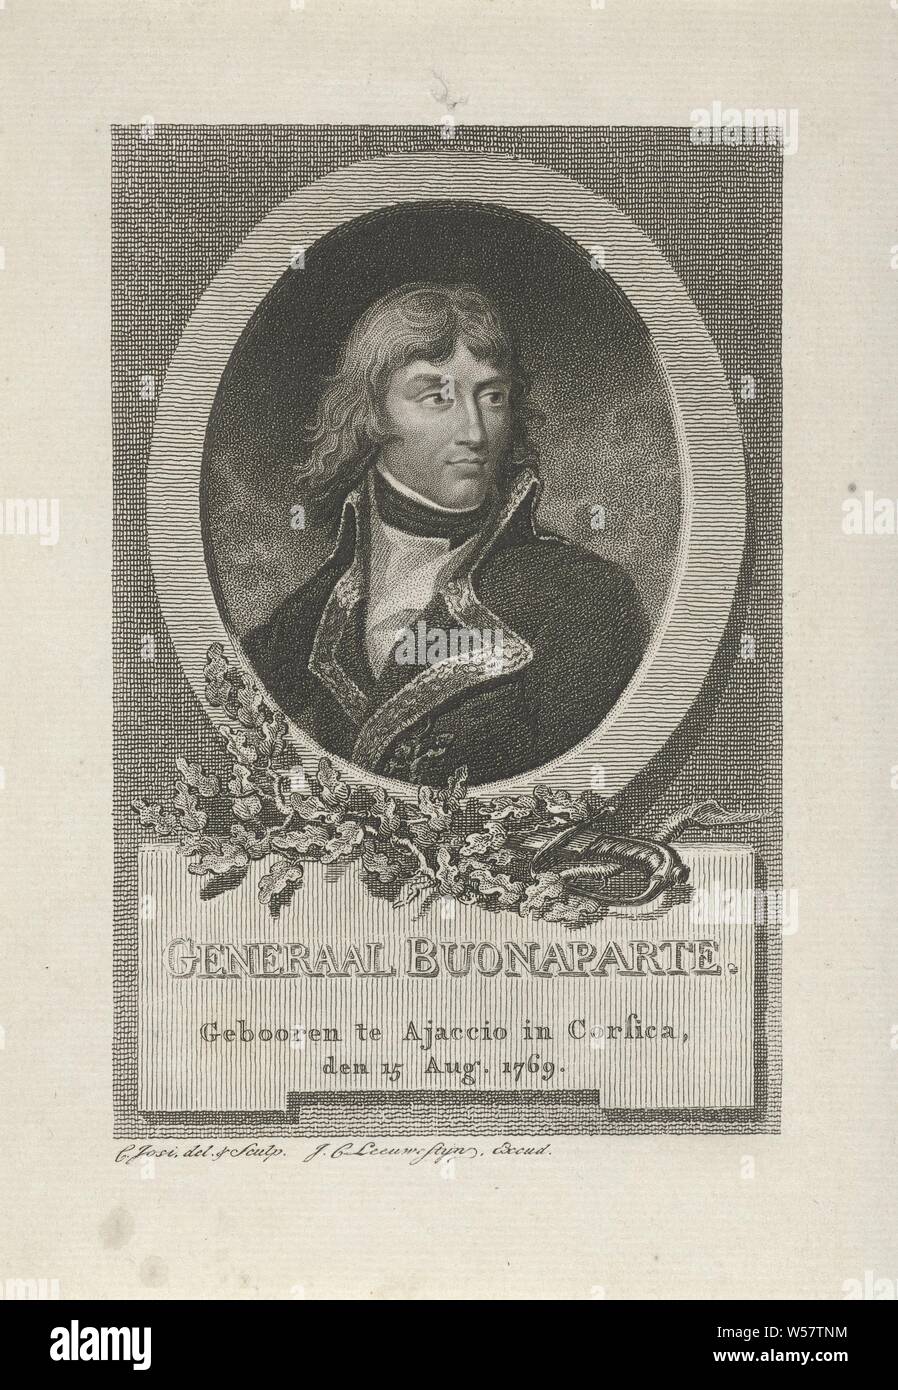 Portrait of Napoleon I Bonaparte, Bust Portrait of Napoleon I Bonaparte, Emperor of the French. The portrait is set in an oval frame with oak leaves underneath. In the context the name of the person portrayed and a two-line caption in Dutch, Napoleon I Bonaparte (Emperor of the French), Christiaan Josi (mentioned on object), Noord-Nederland, 1784 - 1828, paper, engraving, h 199 mm × w 138 mm Stock Photo